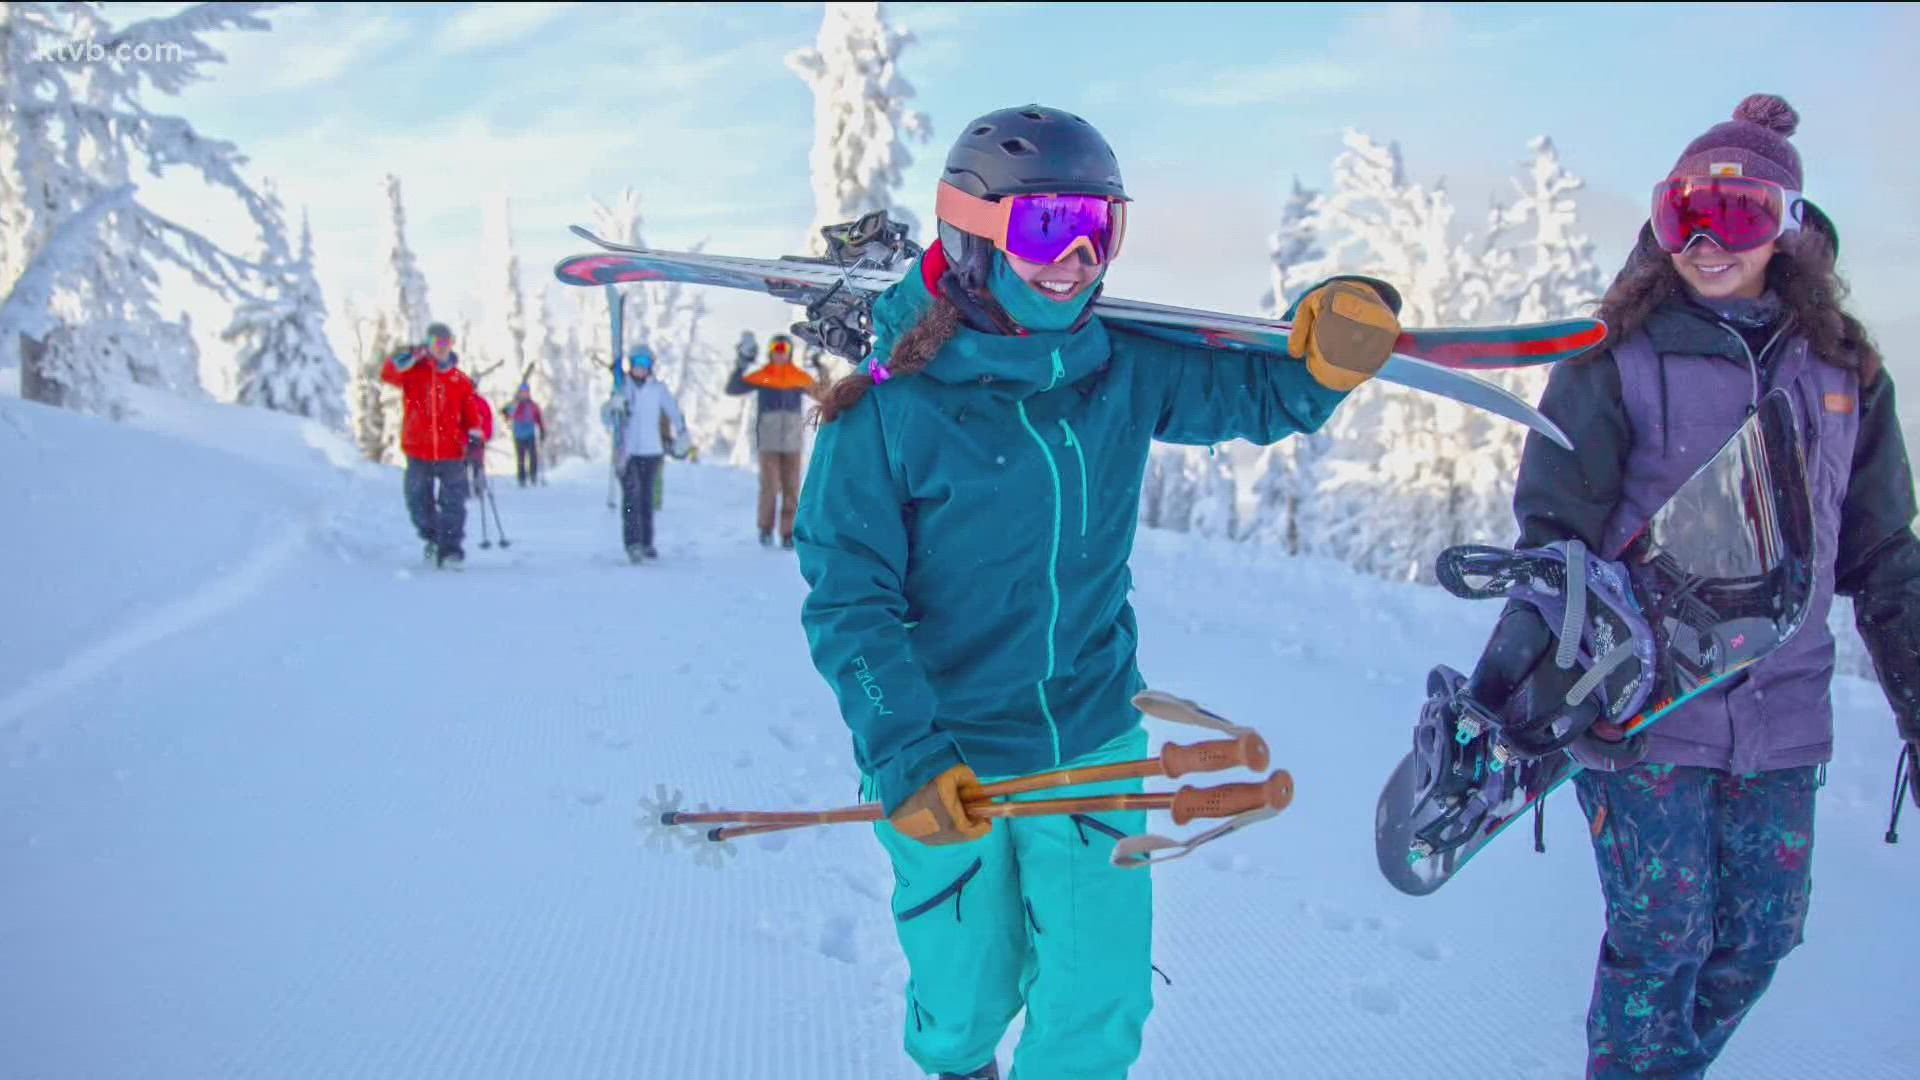 This year's event includes free demos, free 'snowga' practice - or yoga in the snow - and a 'she-shred' session in the afternoon led the women of Team Brundage.